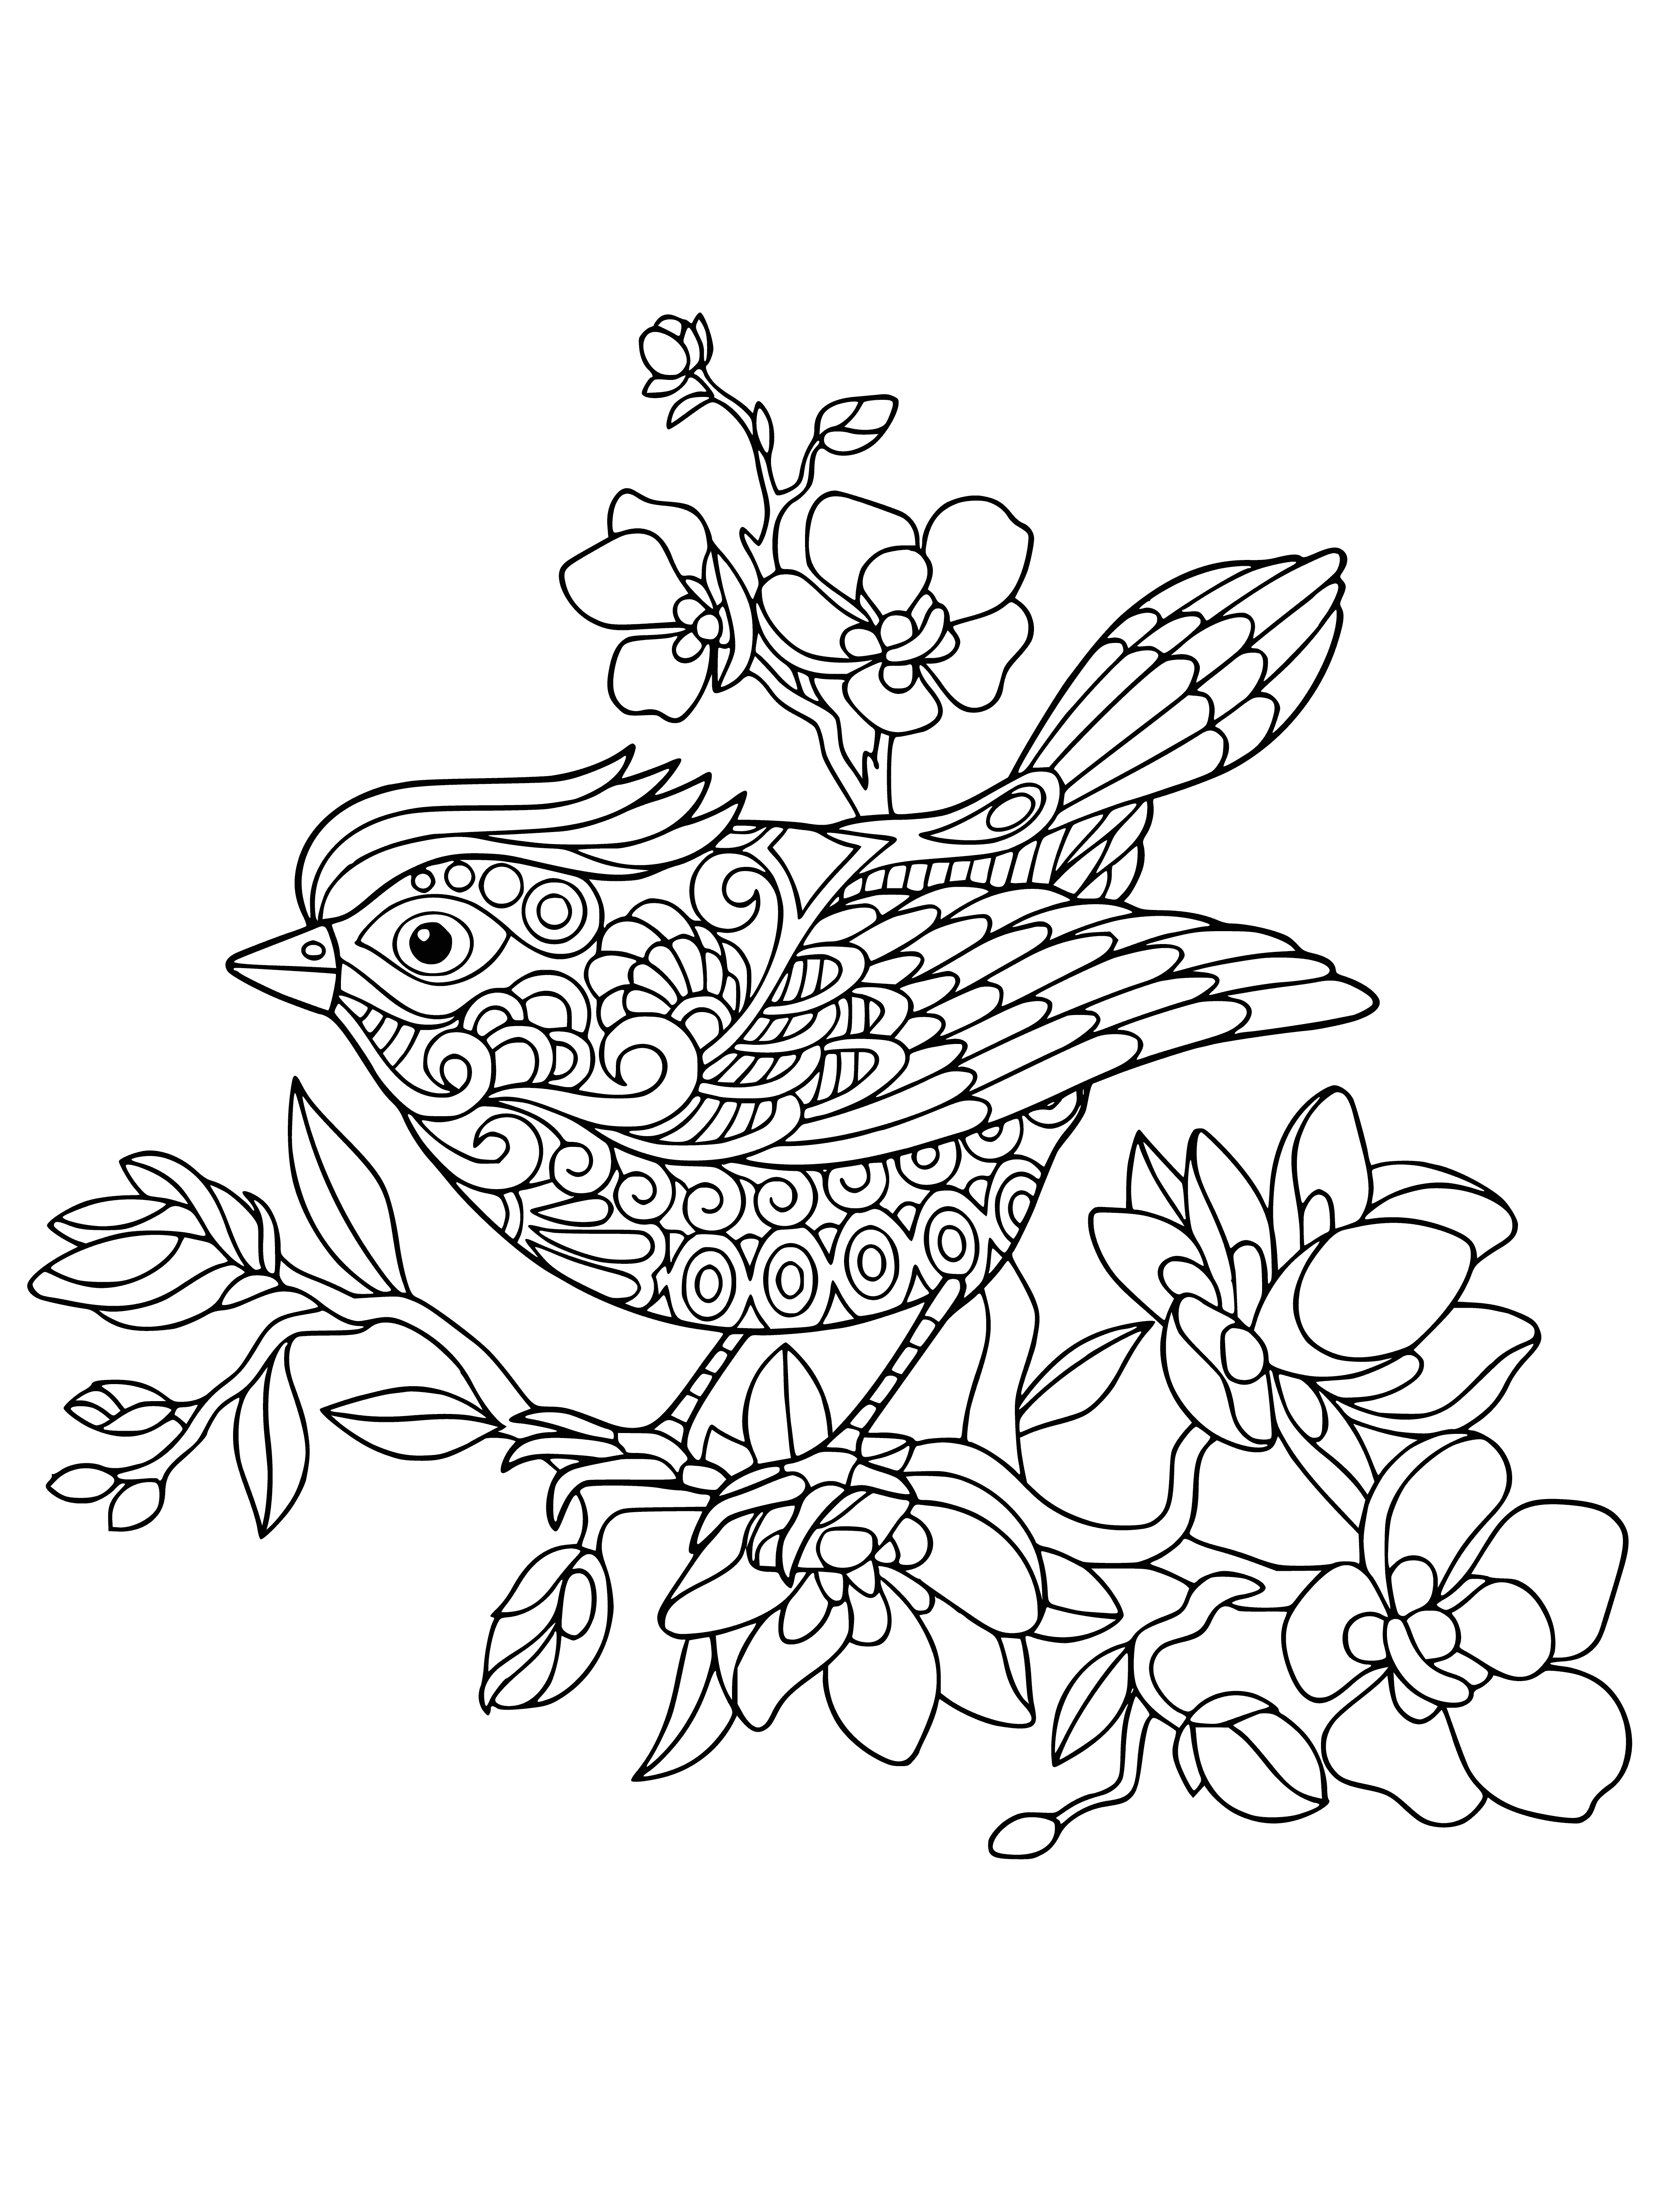 coloring page: A sparrow-like bird perched on a branch, black head w/ white stripe, warm brown body, pale cream underside.